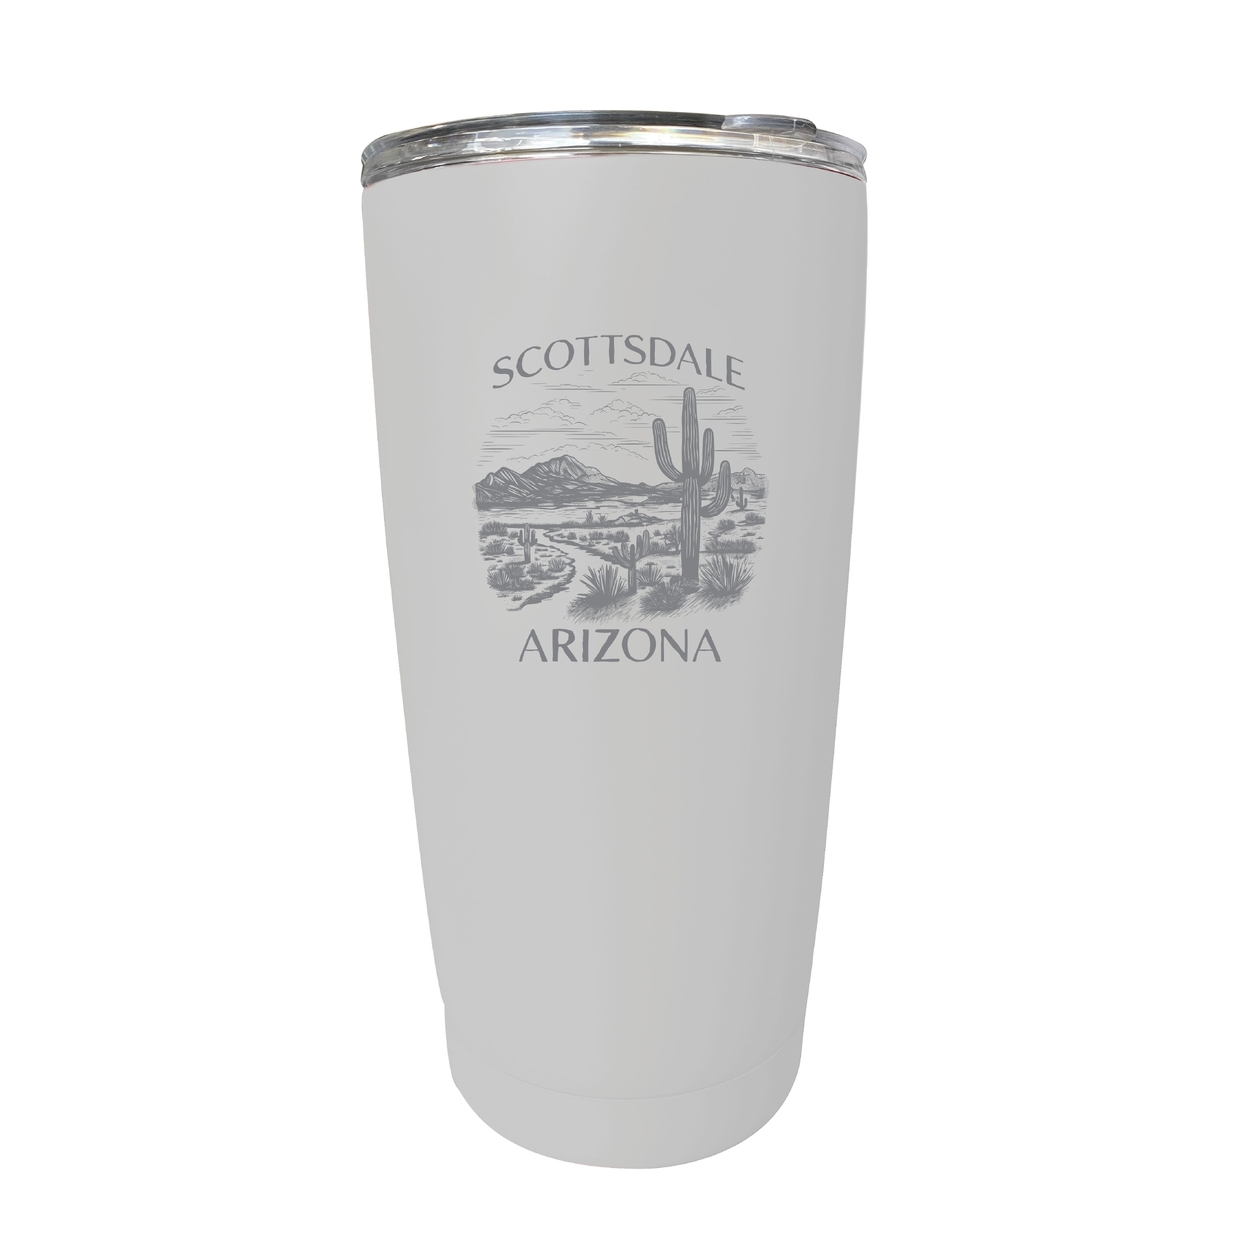 Scottsdale Arizona Souvenir 16 Oz Engraved Stainless Steel Insulated Tumbler - Red,,4-Pack